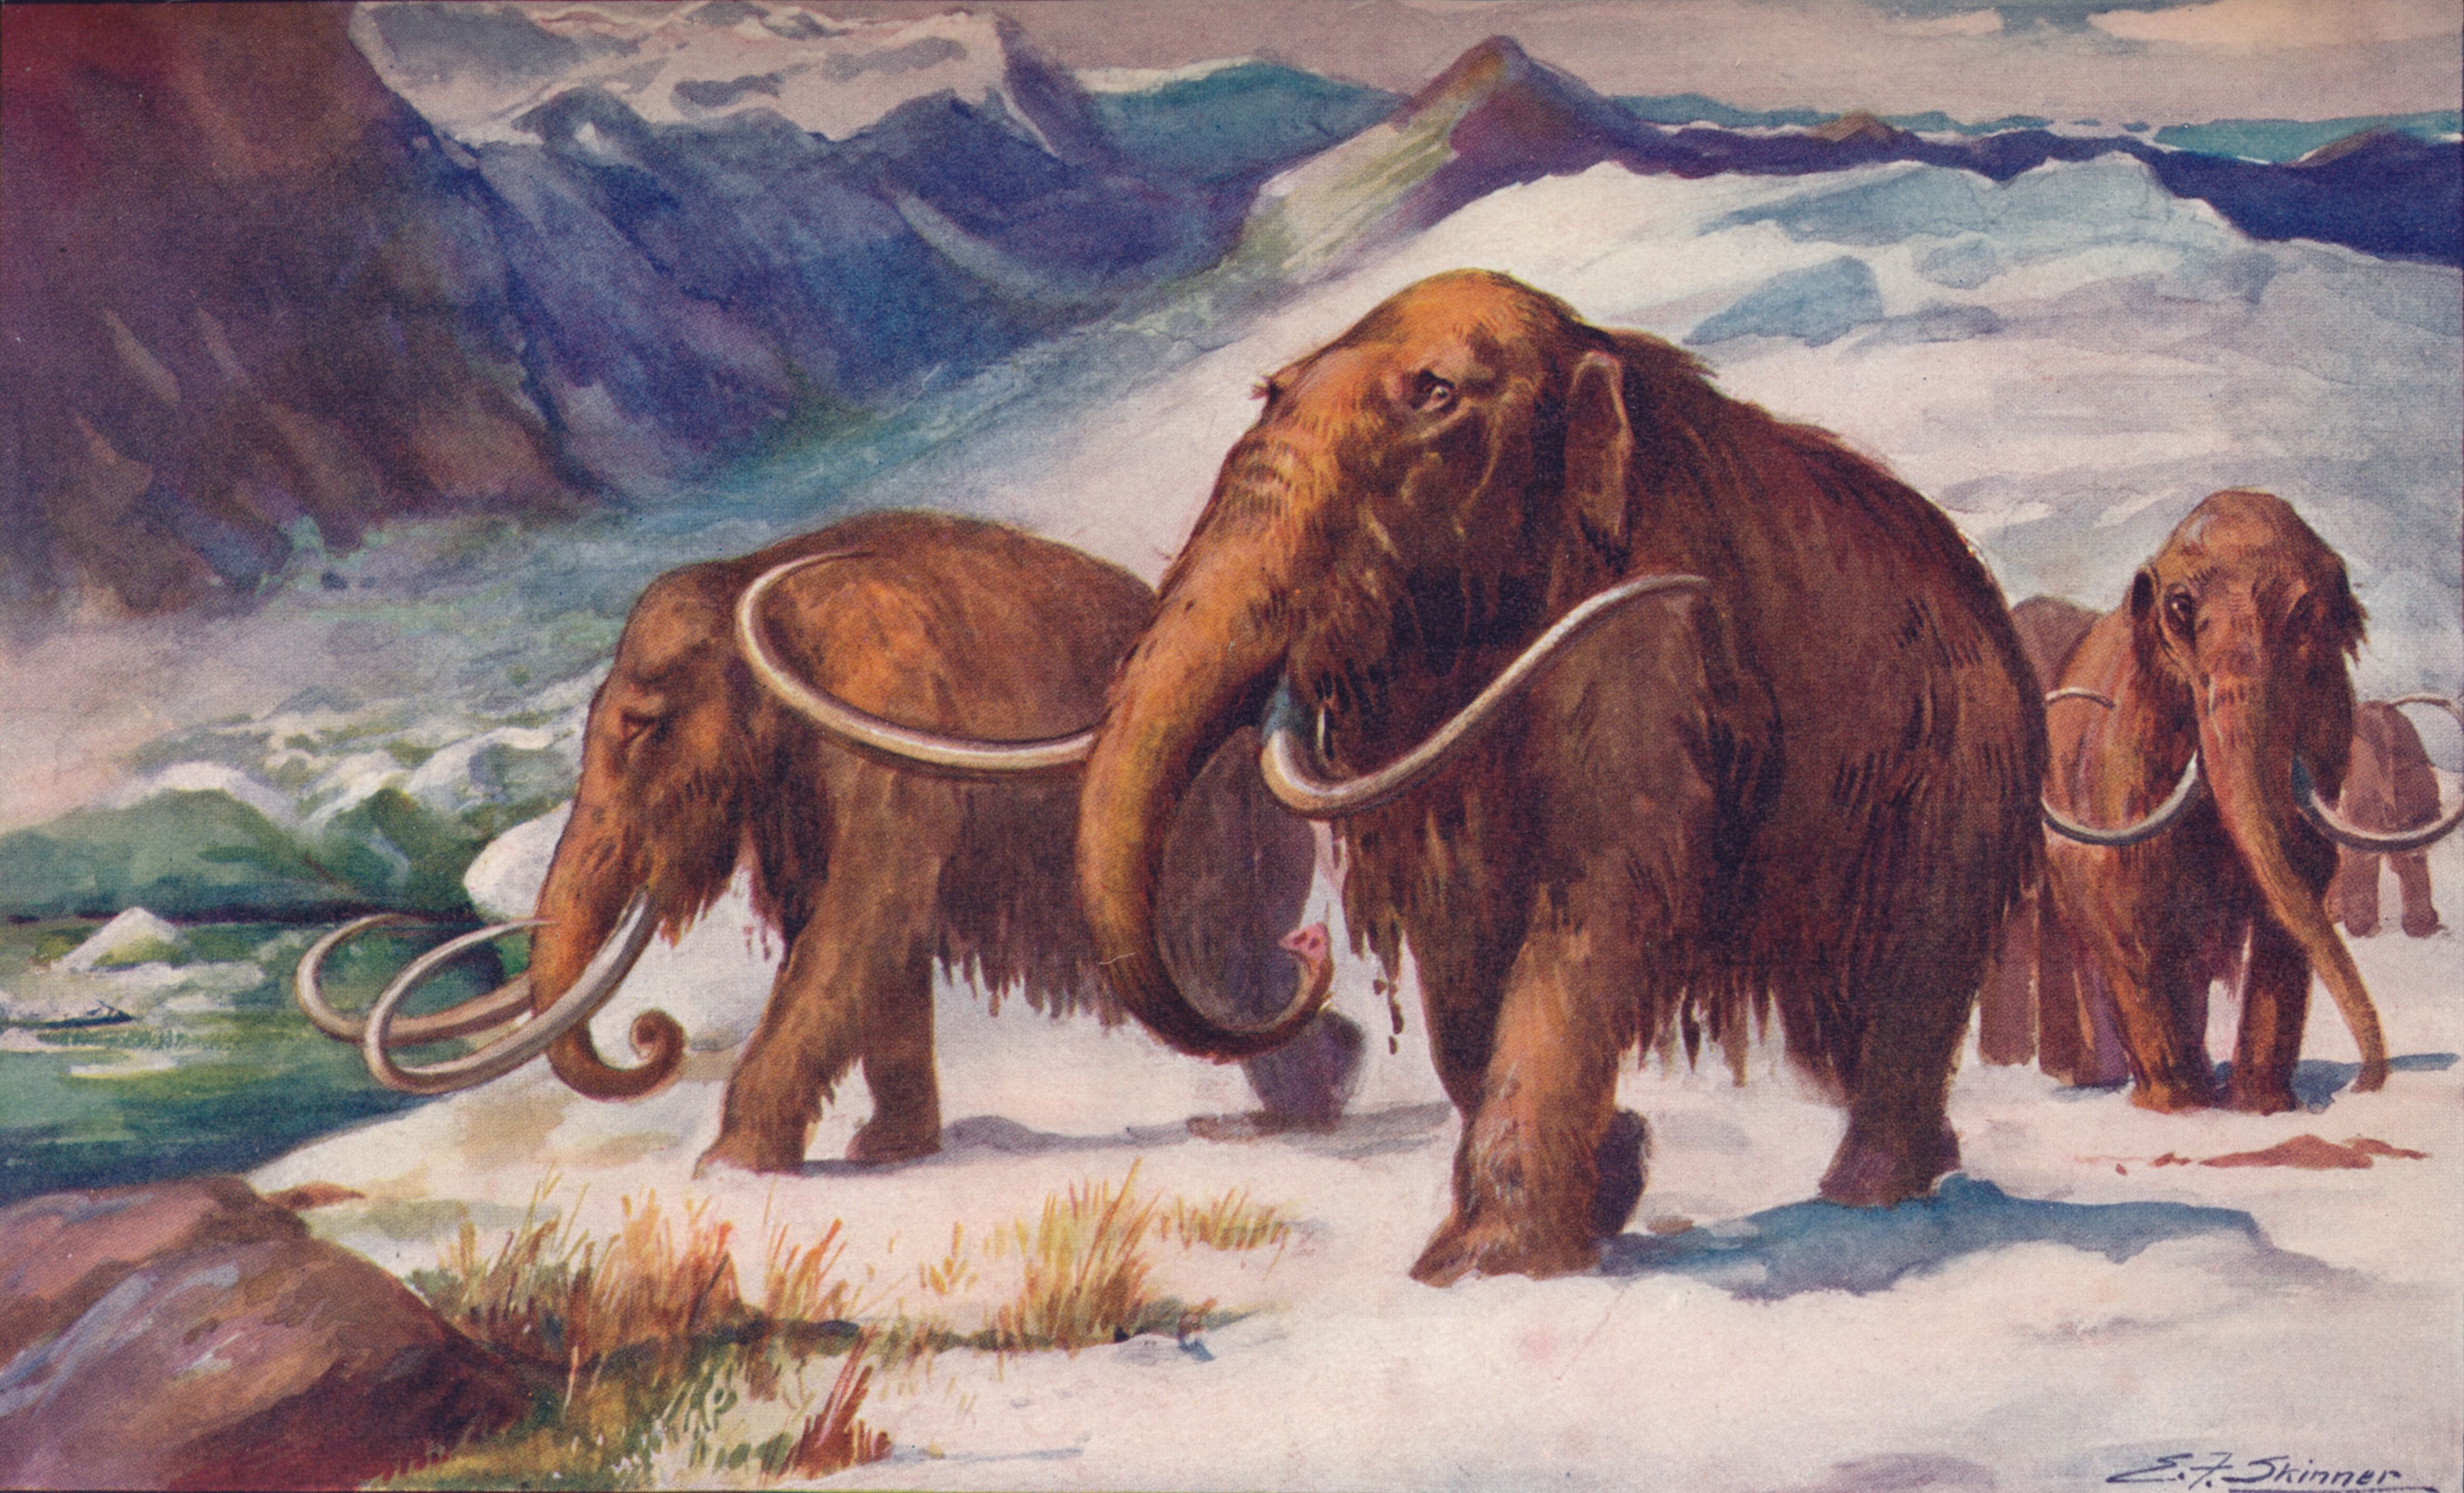 https://hips.hearstapps.com/hmg-prod/images/the-early-ice-age-when-mammoths-roamed-the-earth-and-man-news-photo-588446531-1554918843.jpg